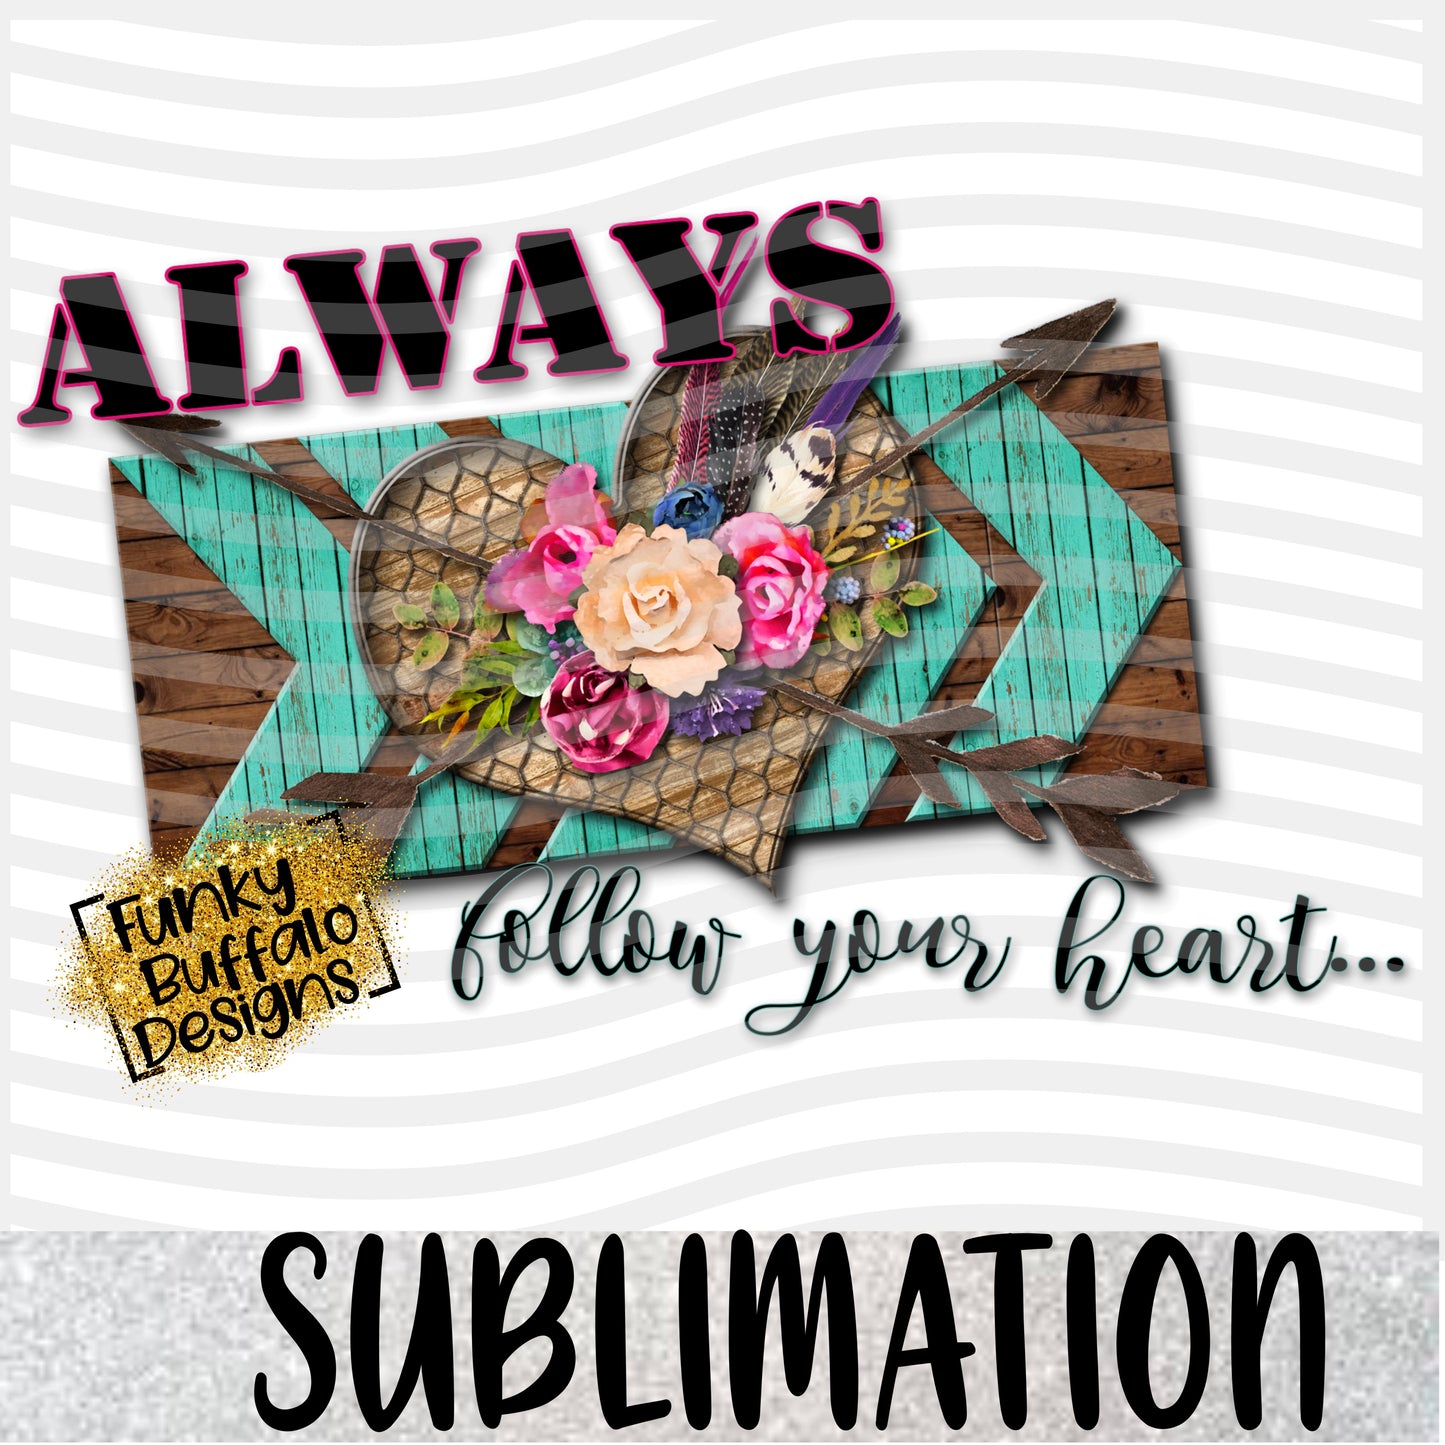 Always Follow Your Heart Sublimation